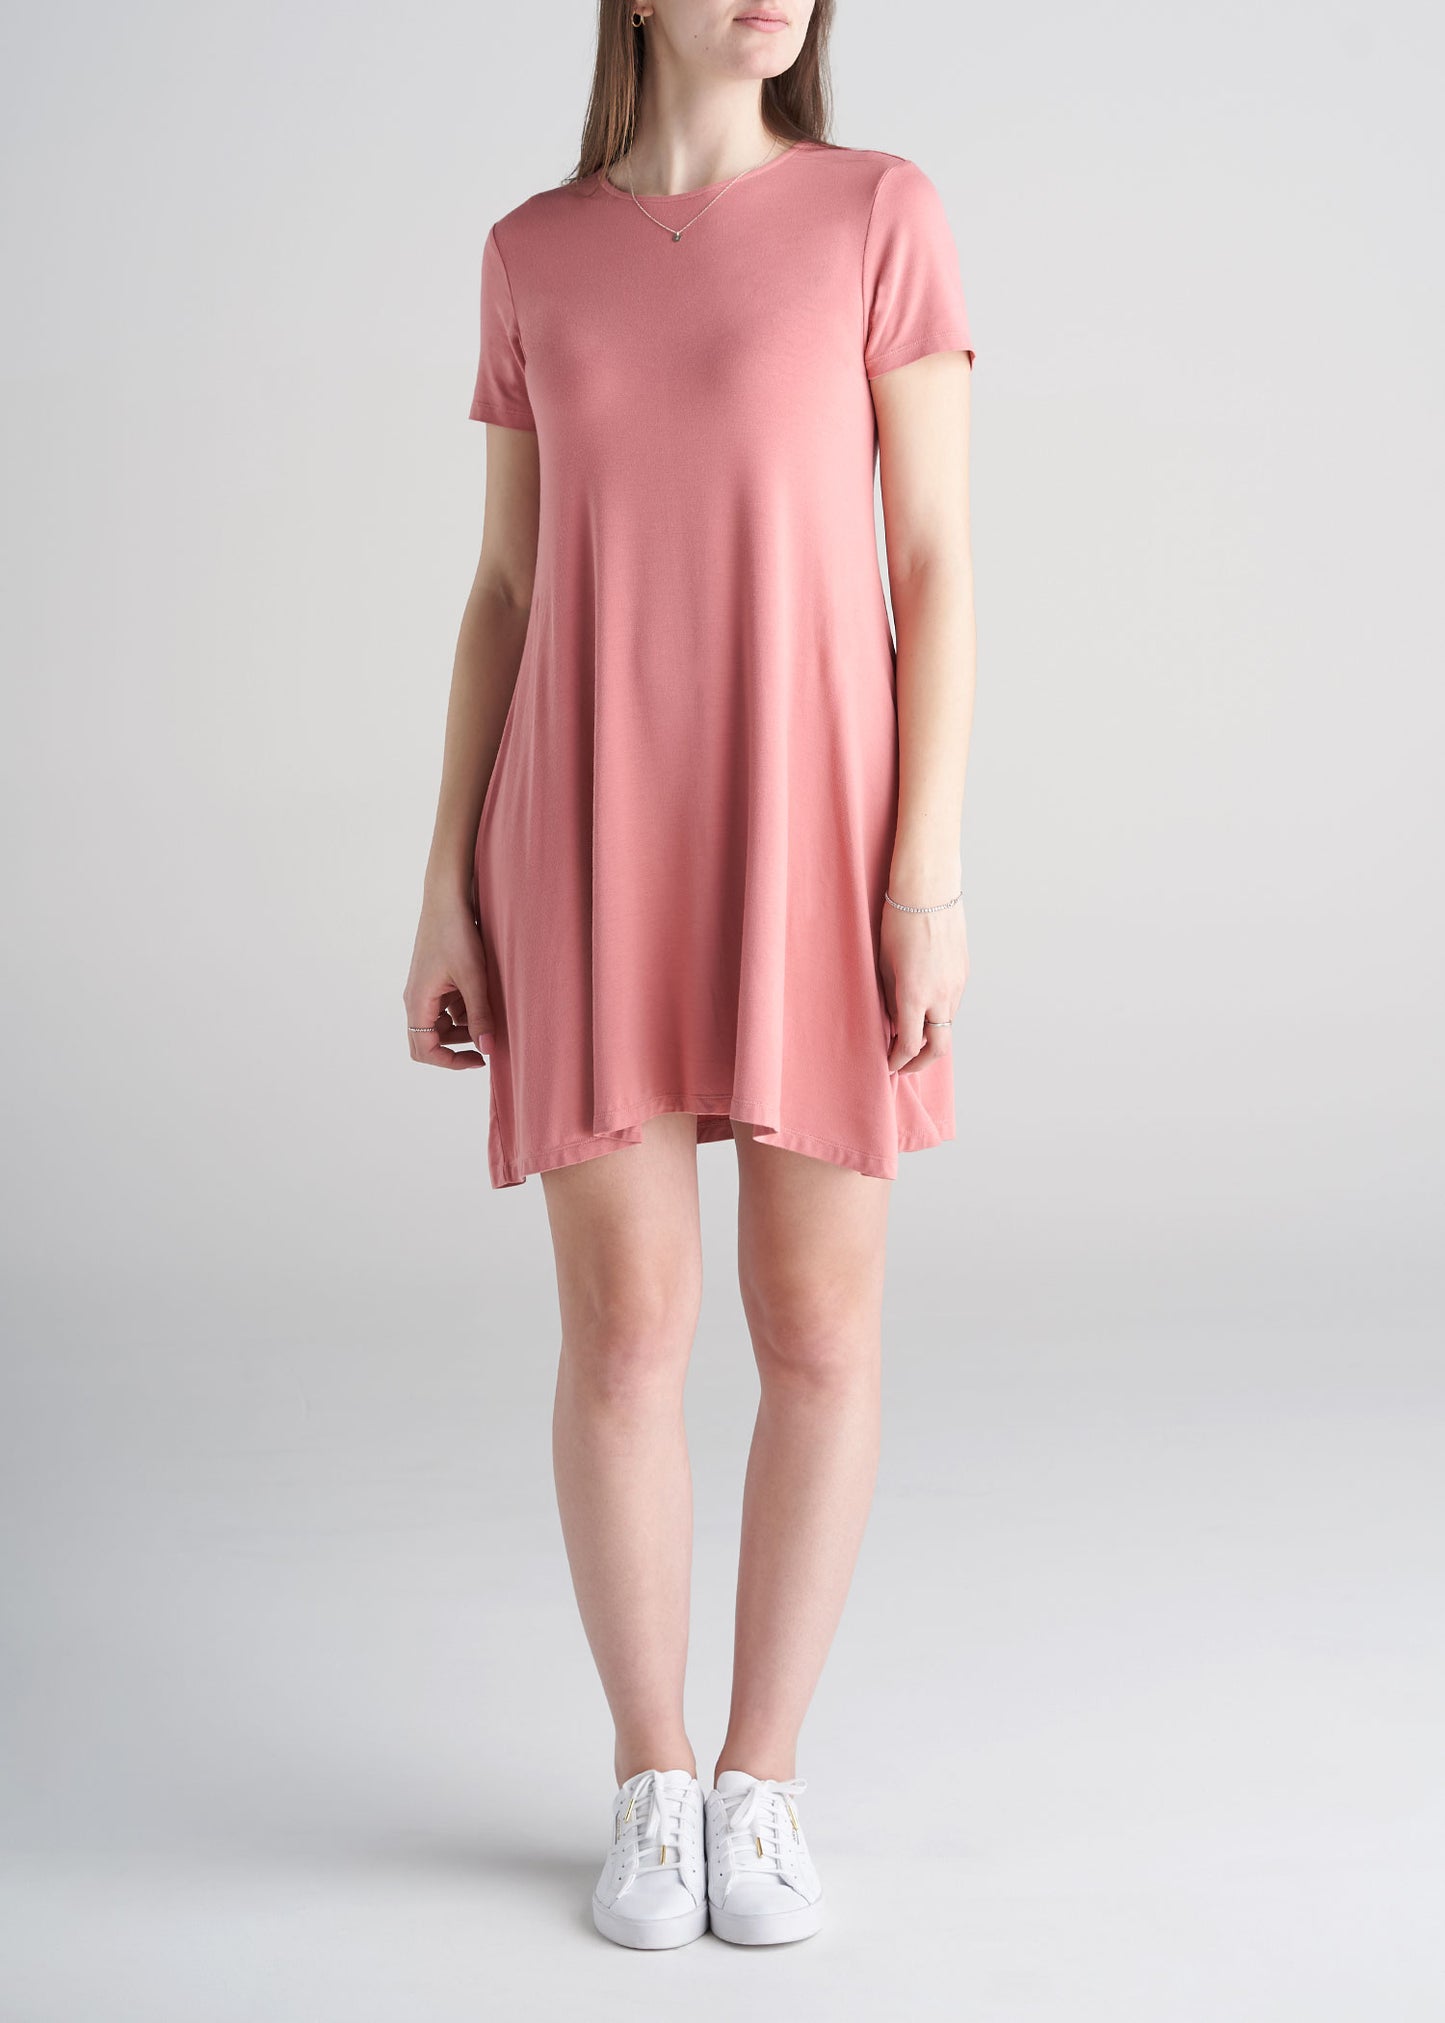 American_Tall_Womens_Swing_Dress_coral_rose-front_view